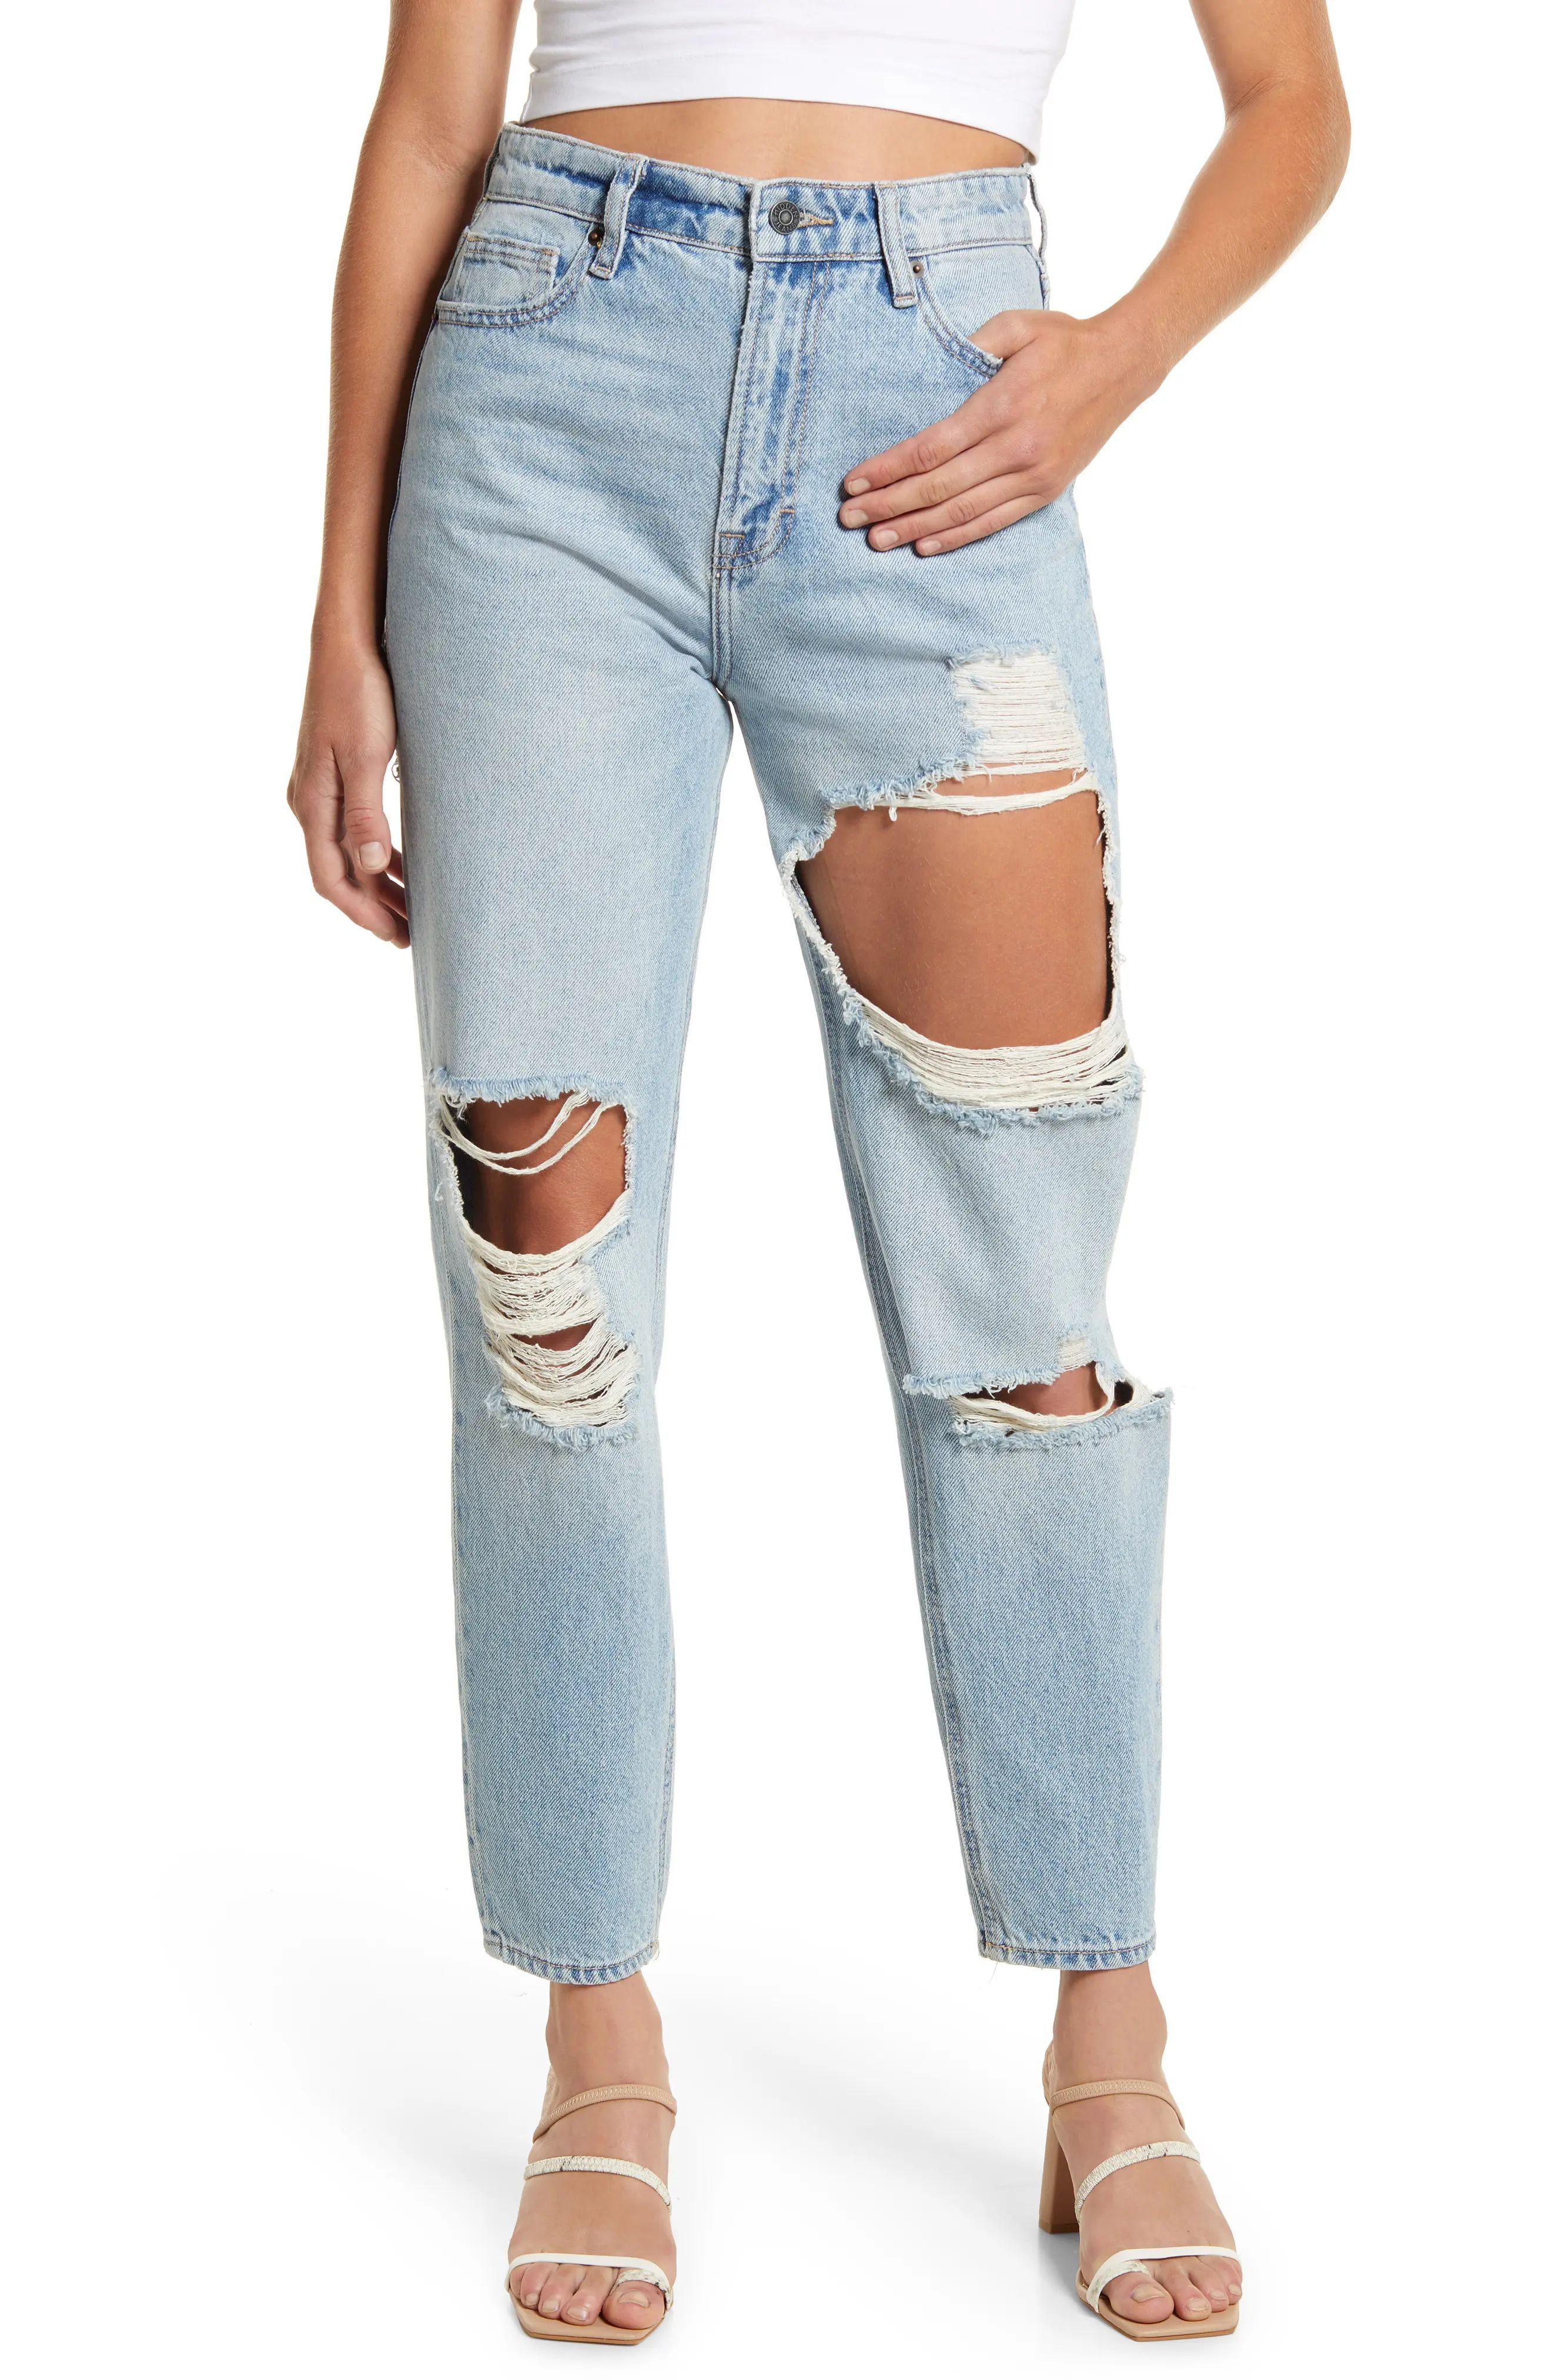 HIDDEN JEANS Distressed Tapered Mom Jeans, Size 27 in Medium Wash at Nordstrom | Nordstrom